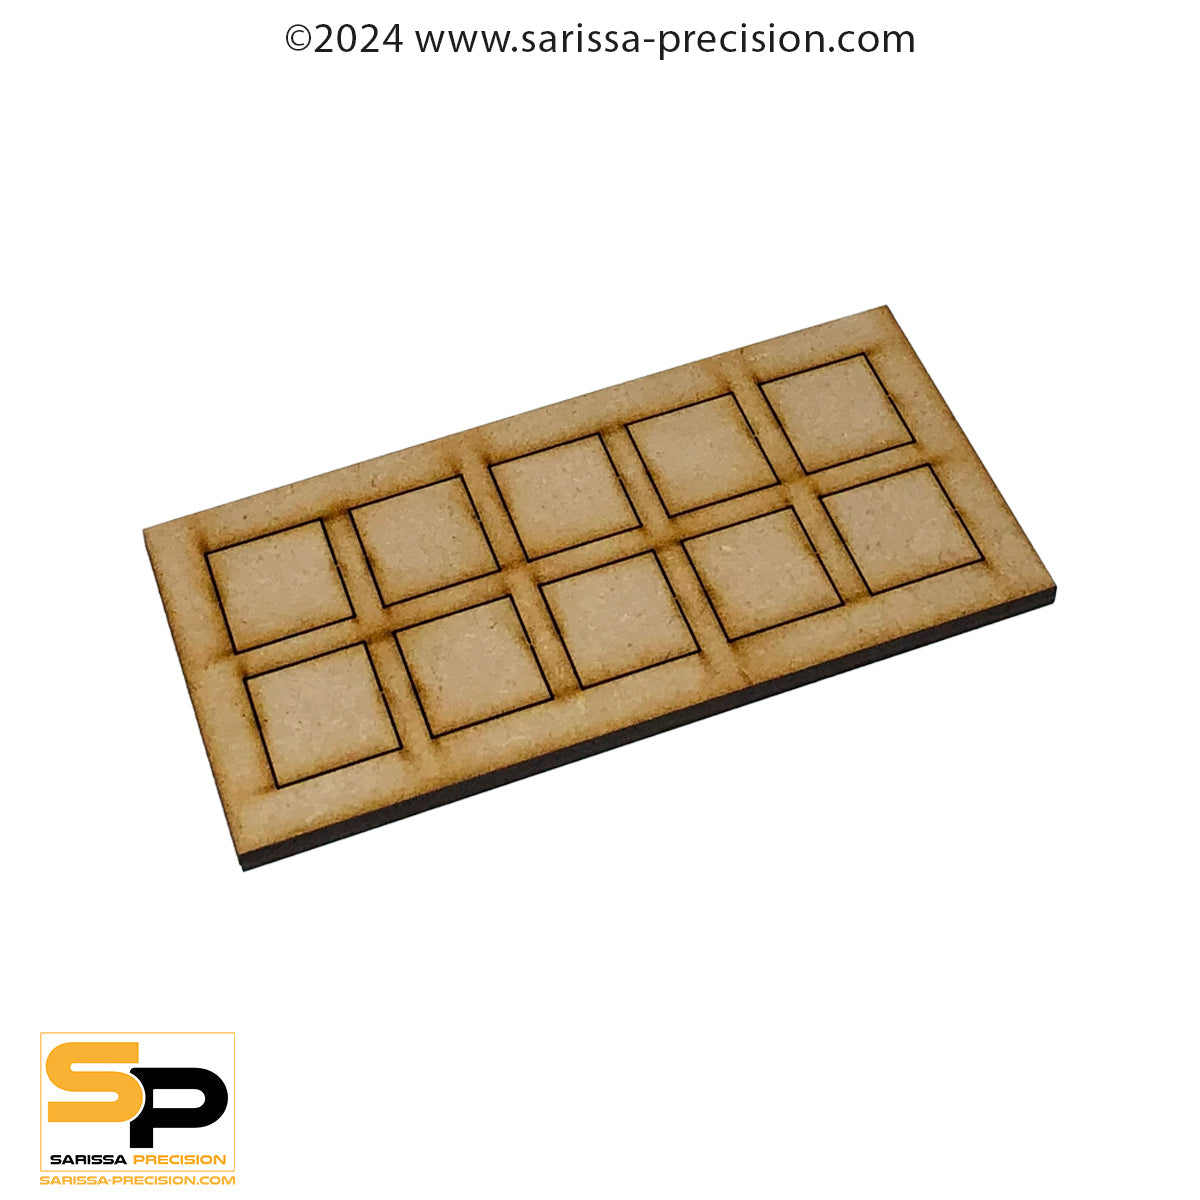 13x12 25x25mm Conversion Tray for 20x20mm bases